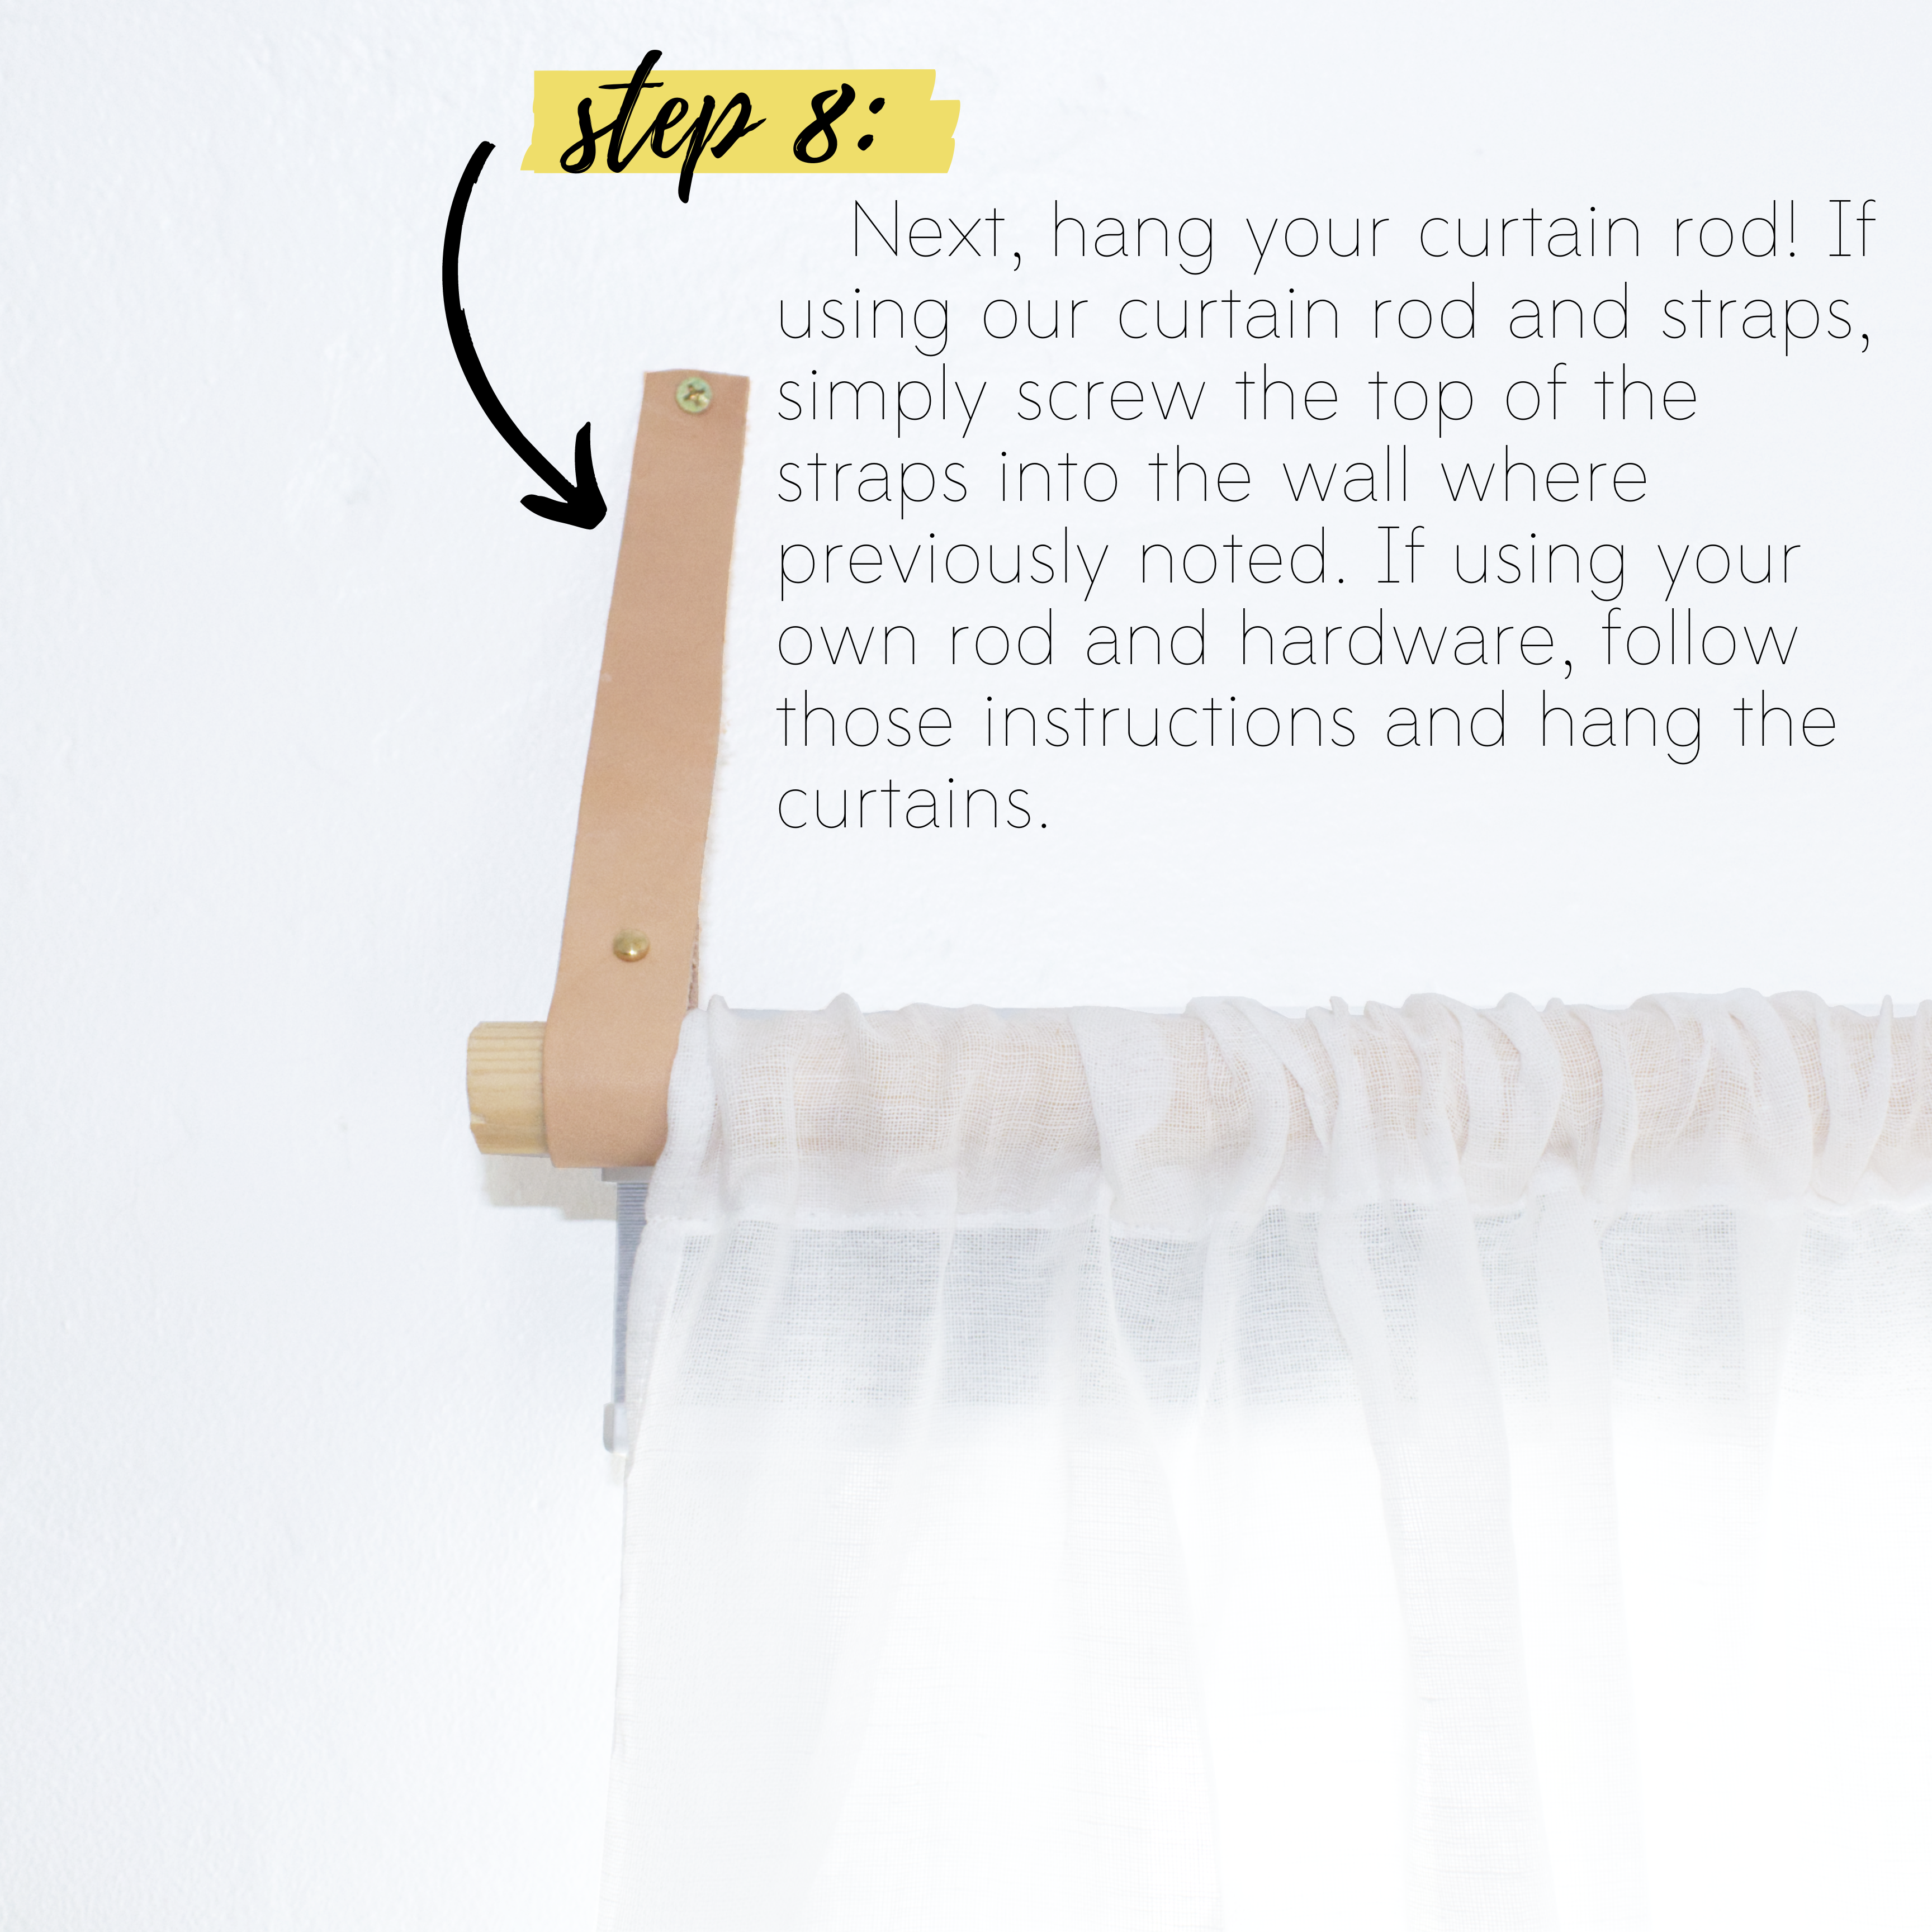 How to sew easy curtains DIY sewing tutorial: Step 8